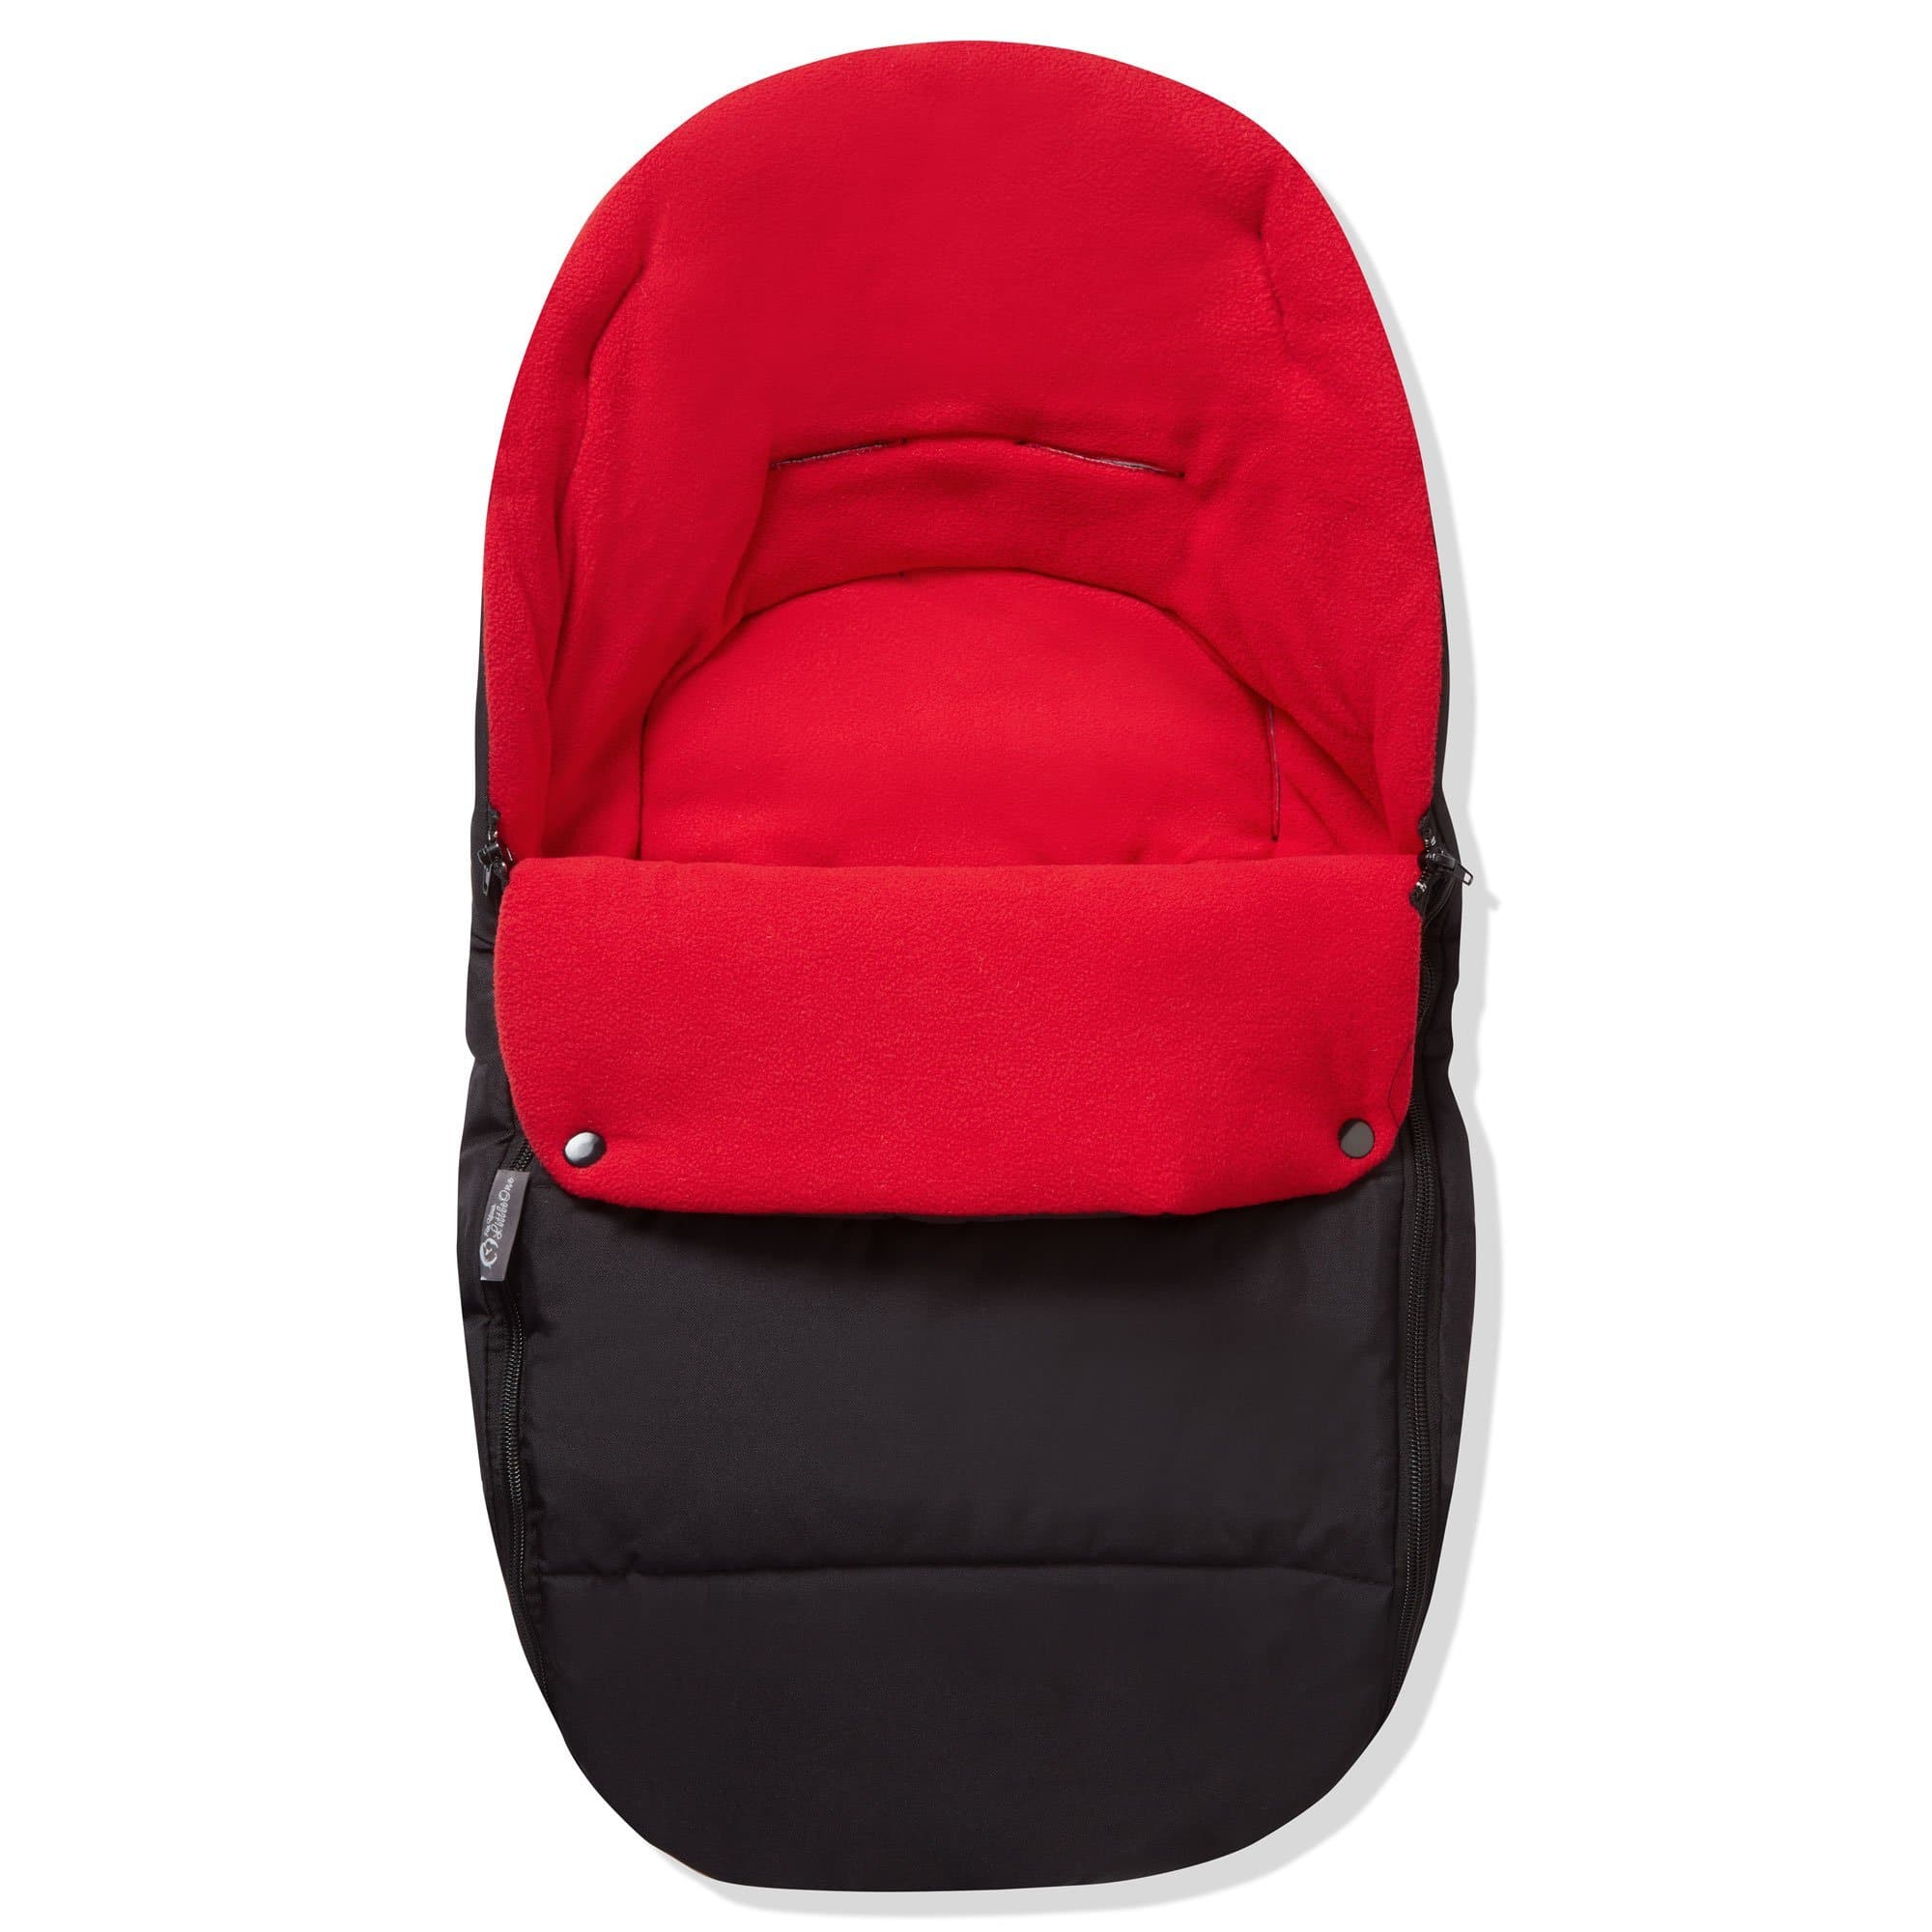 Premium Car Seat Footmuff / Cosy Toes Compatible With Bebecar - Fire Red / Fits All Models | For Your Little One